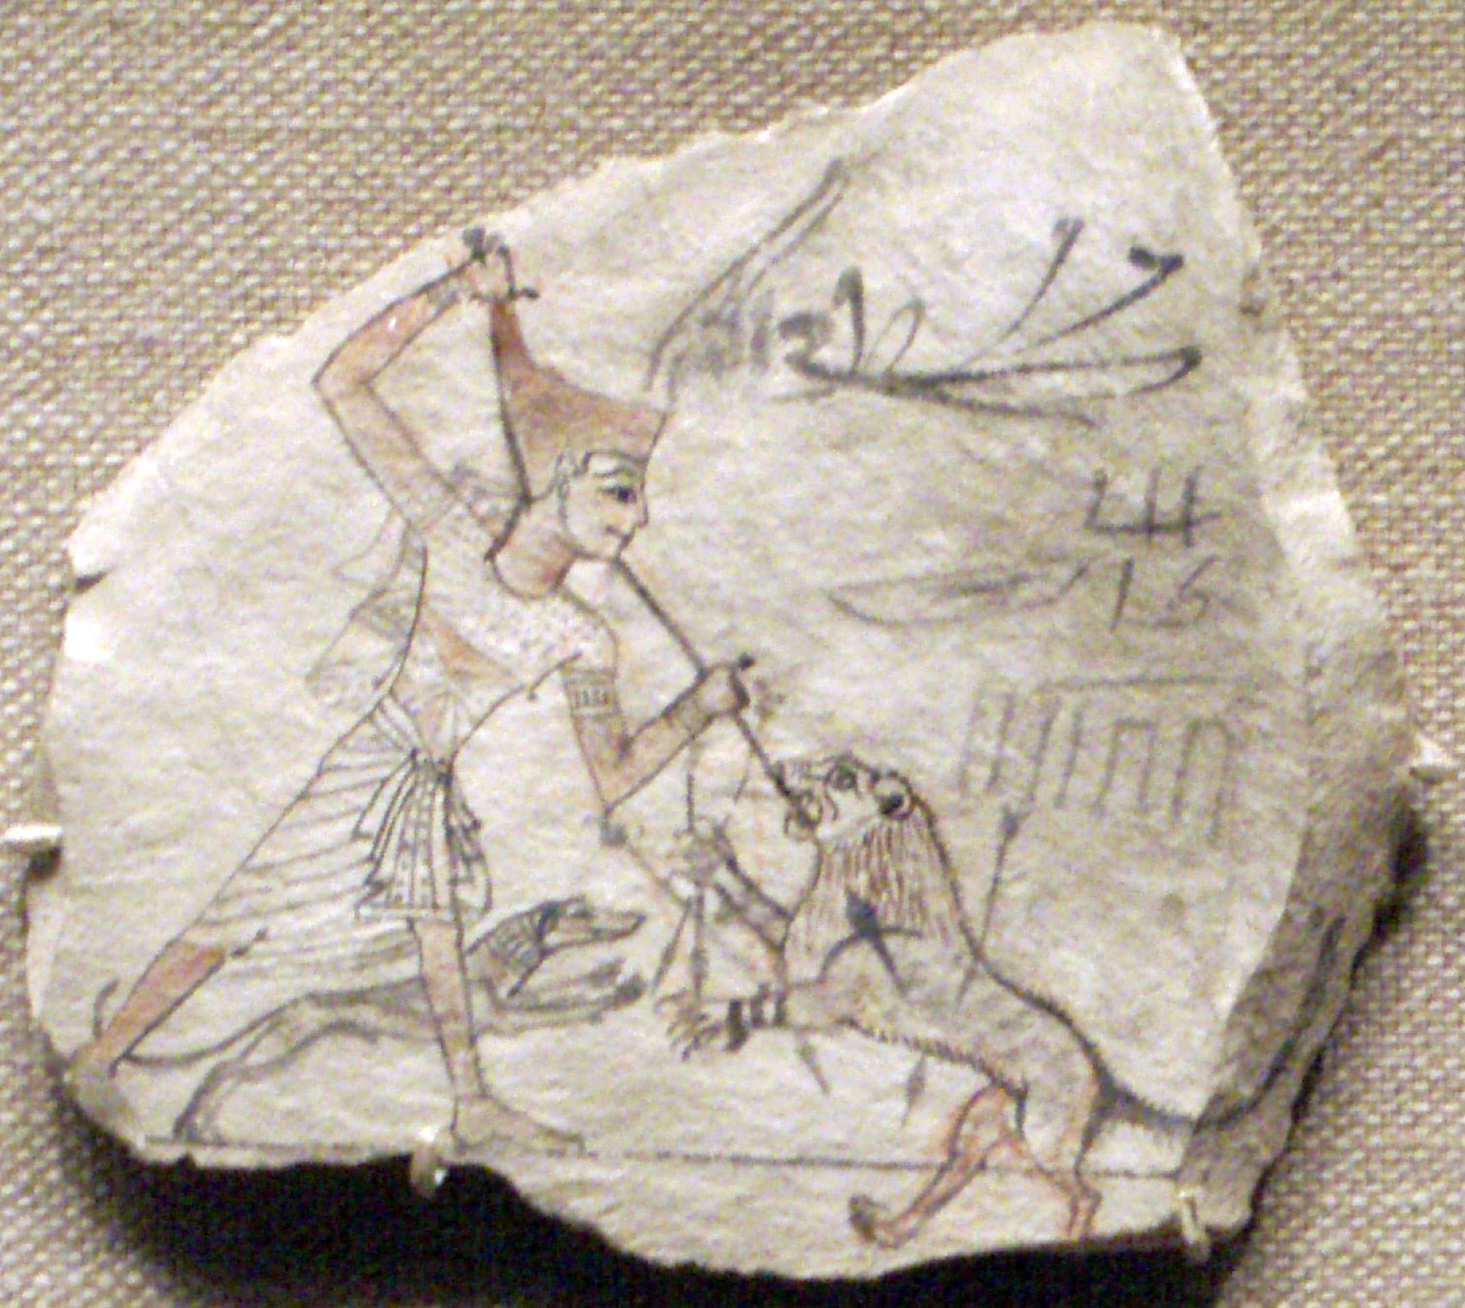 Ostracon from the Ramesside period, dynasties 19-20. From Thebes.